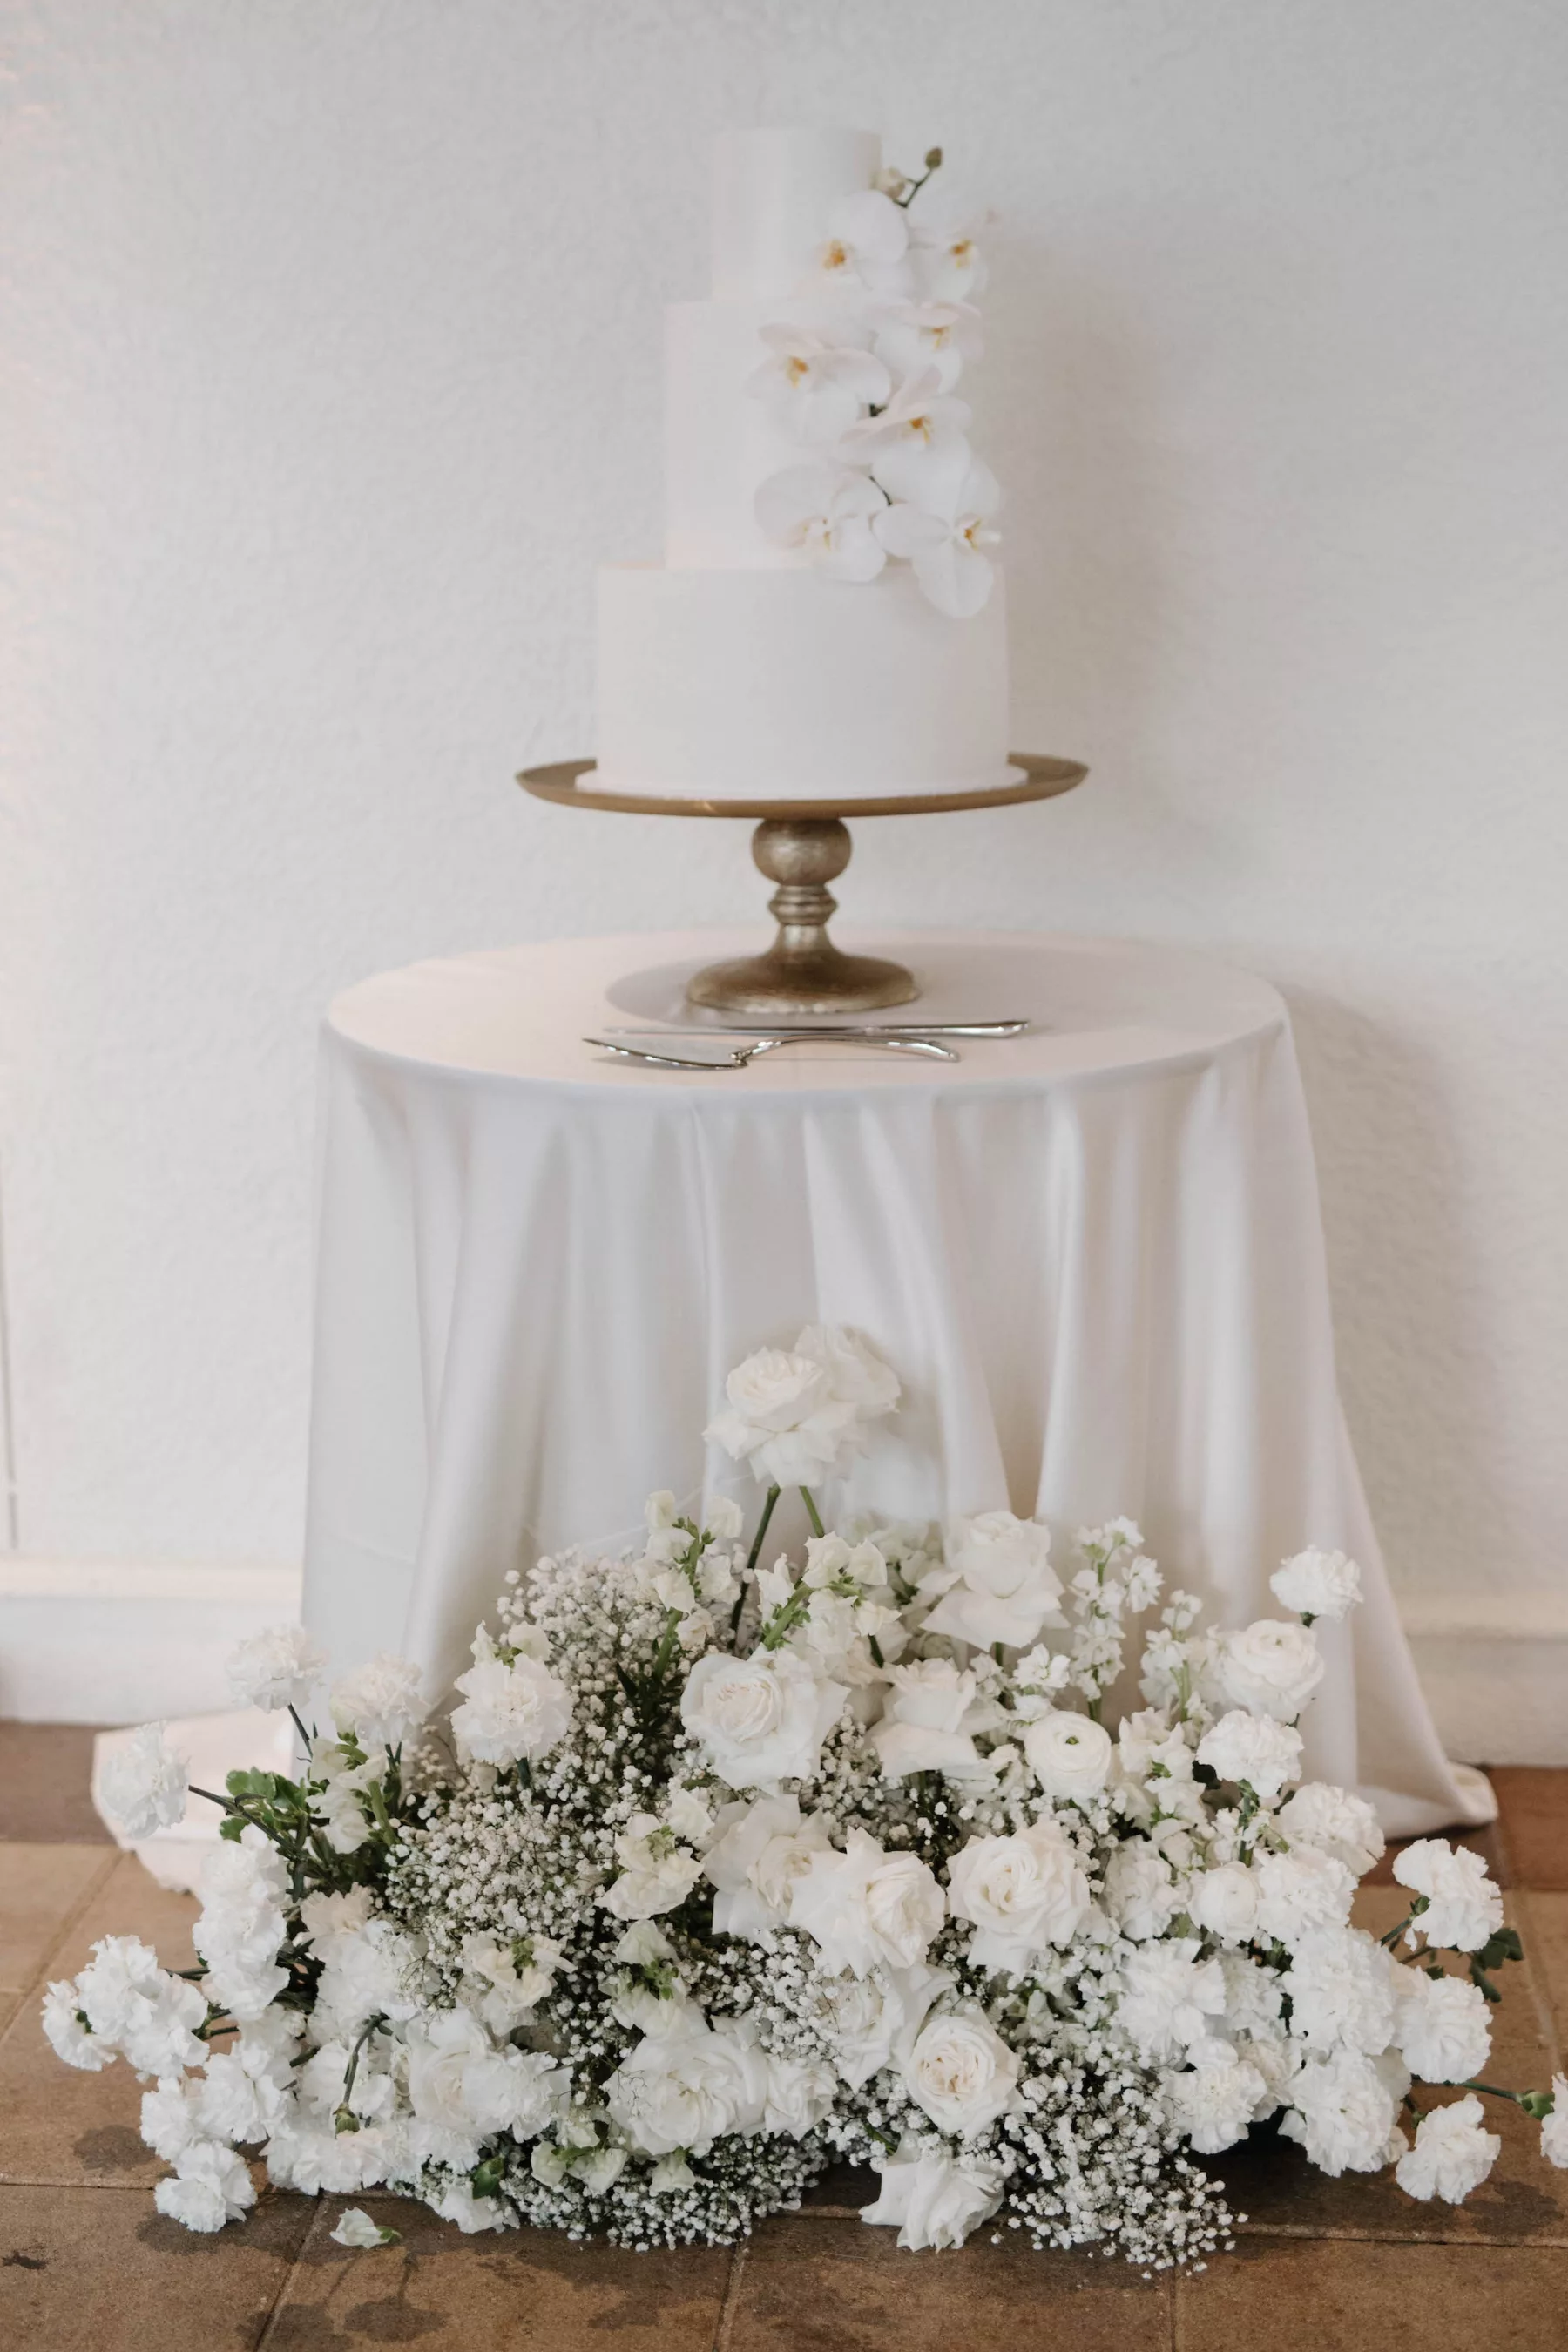 Round Three-Tiered White Wedding Cake with Orchid Accents | Monochromatic Flower Arrangement with White Roses, Baby's Breath, and Carnations | Timeless Cake Table Floral Decor Ideas